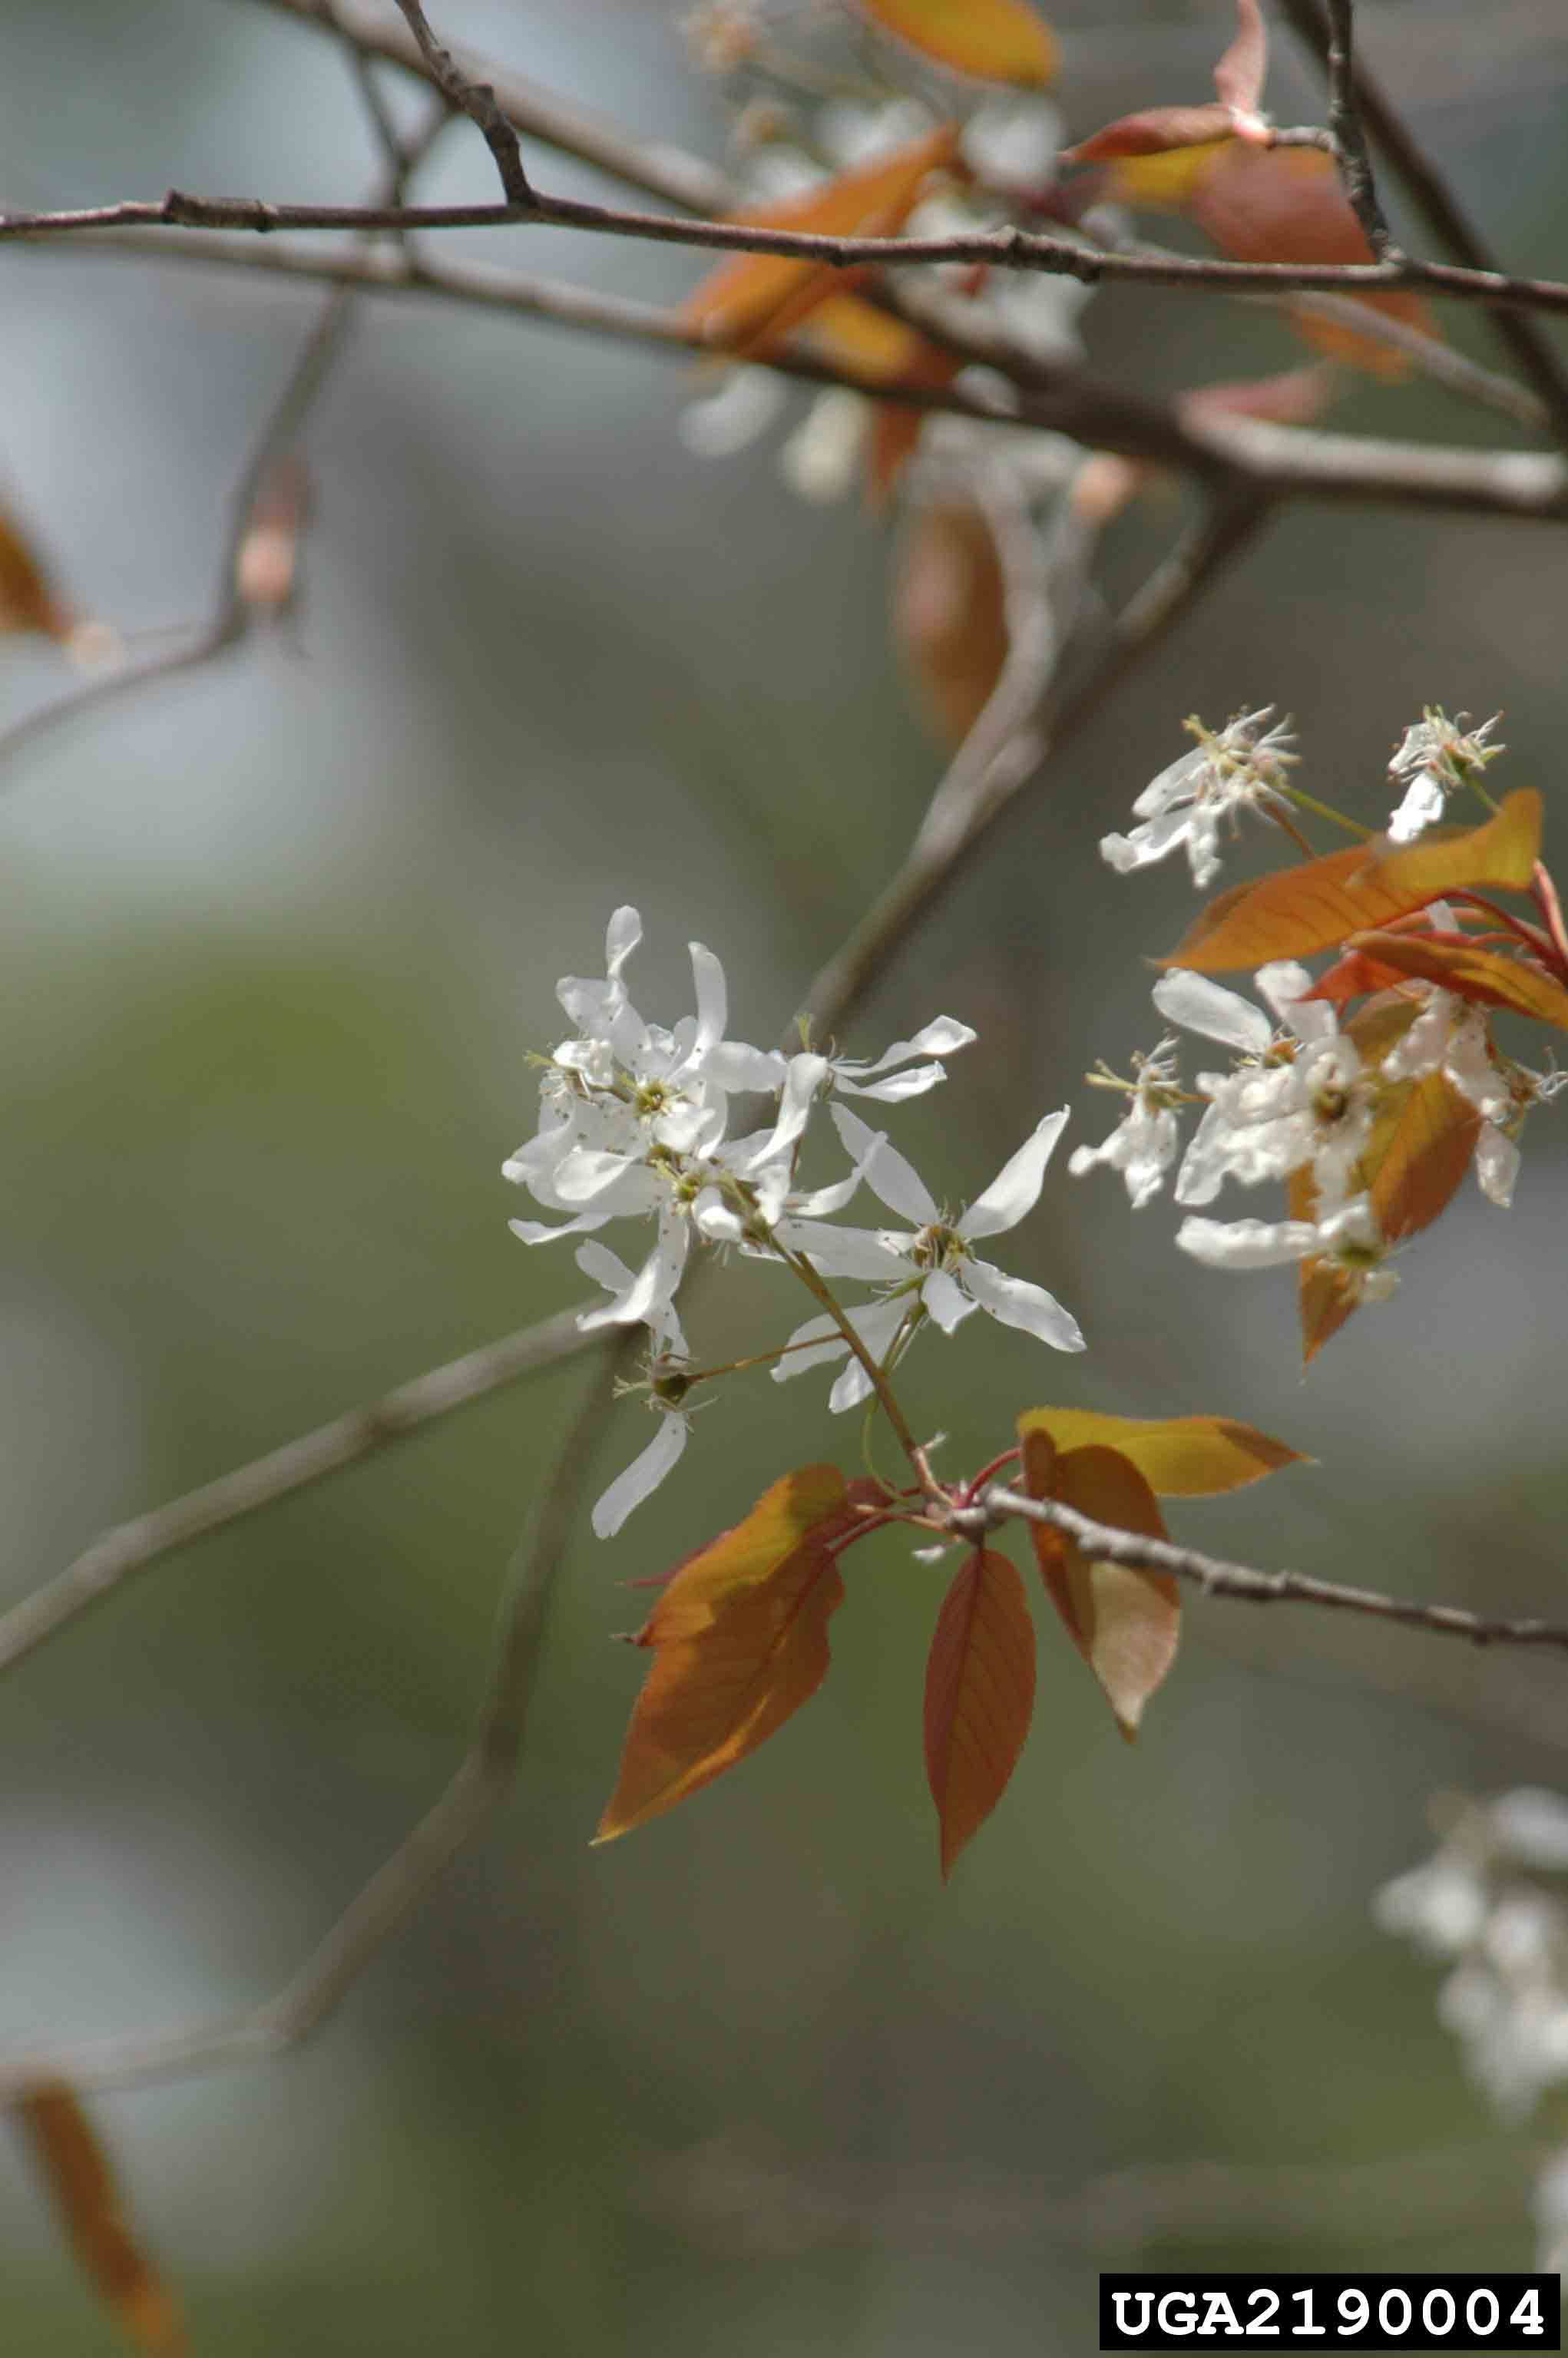 Serviceberry flowers in clusters, before the new leaves emerge